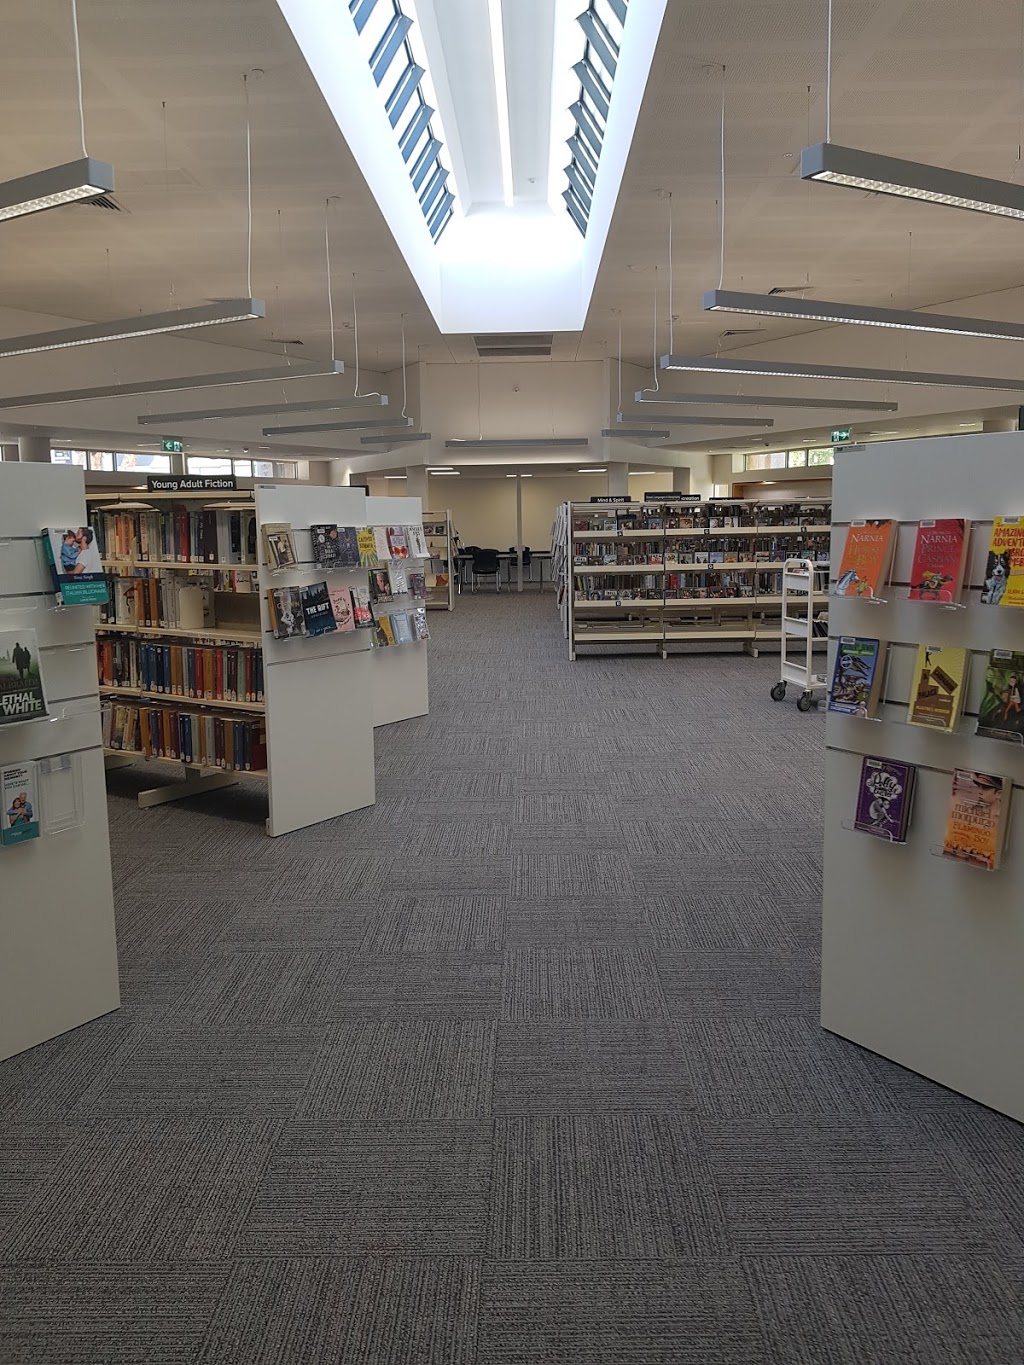 Tweed Heads Library | library | Wharf St, Tweed Heads NSW 2485, Australia | 0755693150 OR +61 7 5569 3150